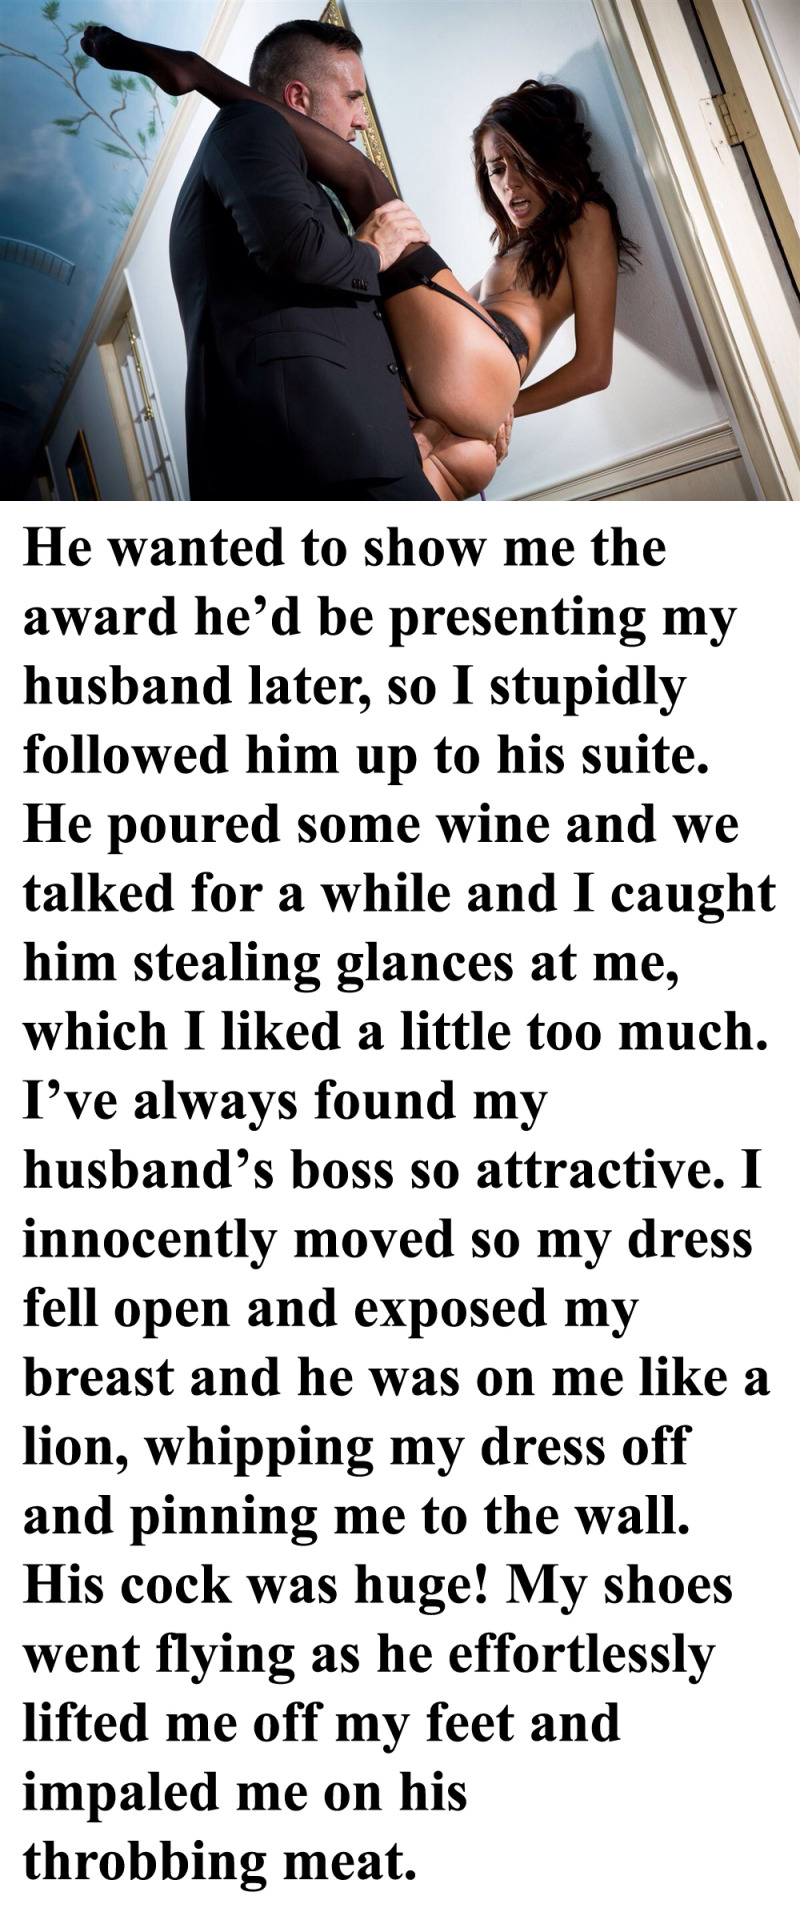 myeroticbunny:  He wanted to show me the award he’d be presenting my husband later,